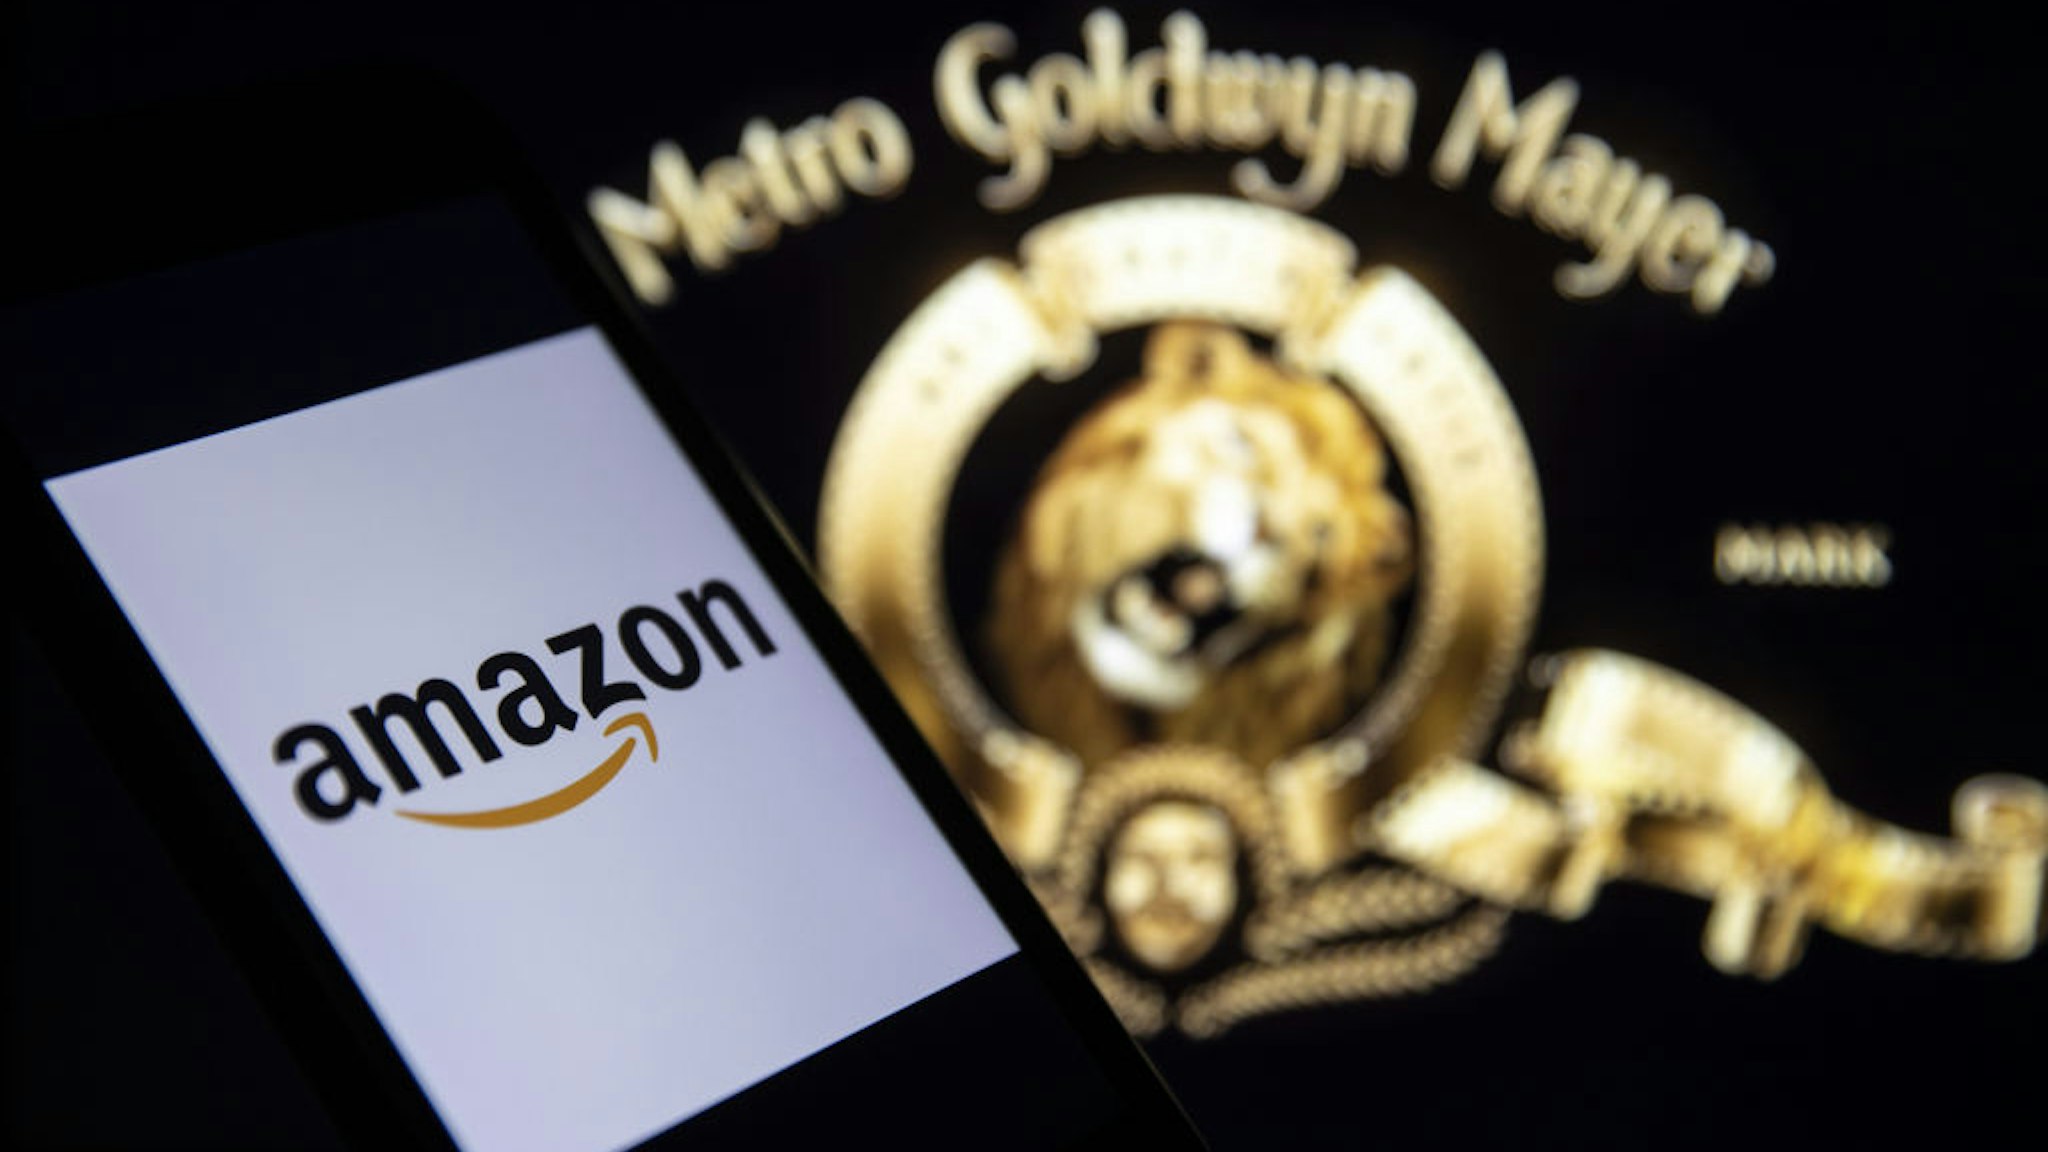 In this illustration photo Amazon logo is displayed on a smart phone screen with Goldwyn Mayer (MGM), in Ankara, Turkey on June 3, 2021. (Photo by Muhammed Selim Korkutata/Anadolu Agency via Getty Images)